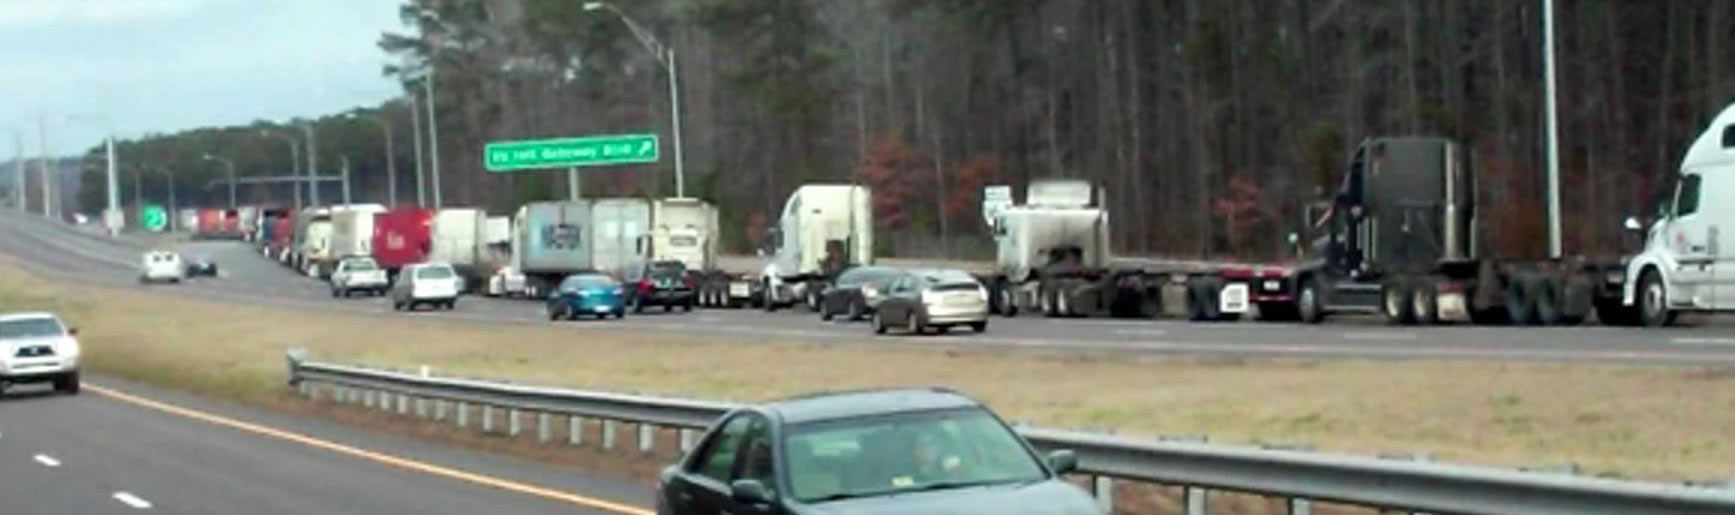 Image of a series of mack trucks on a highway.